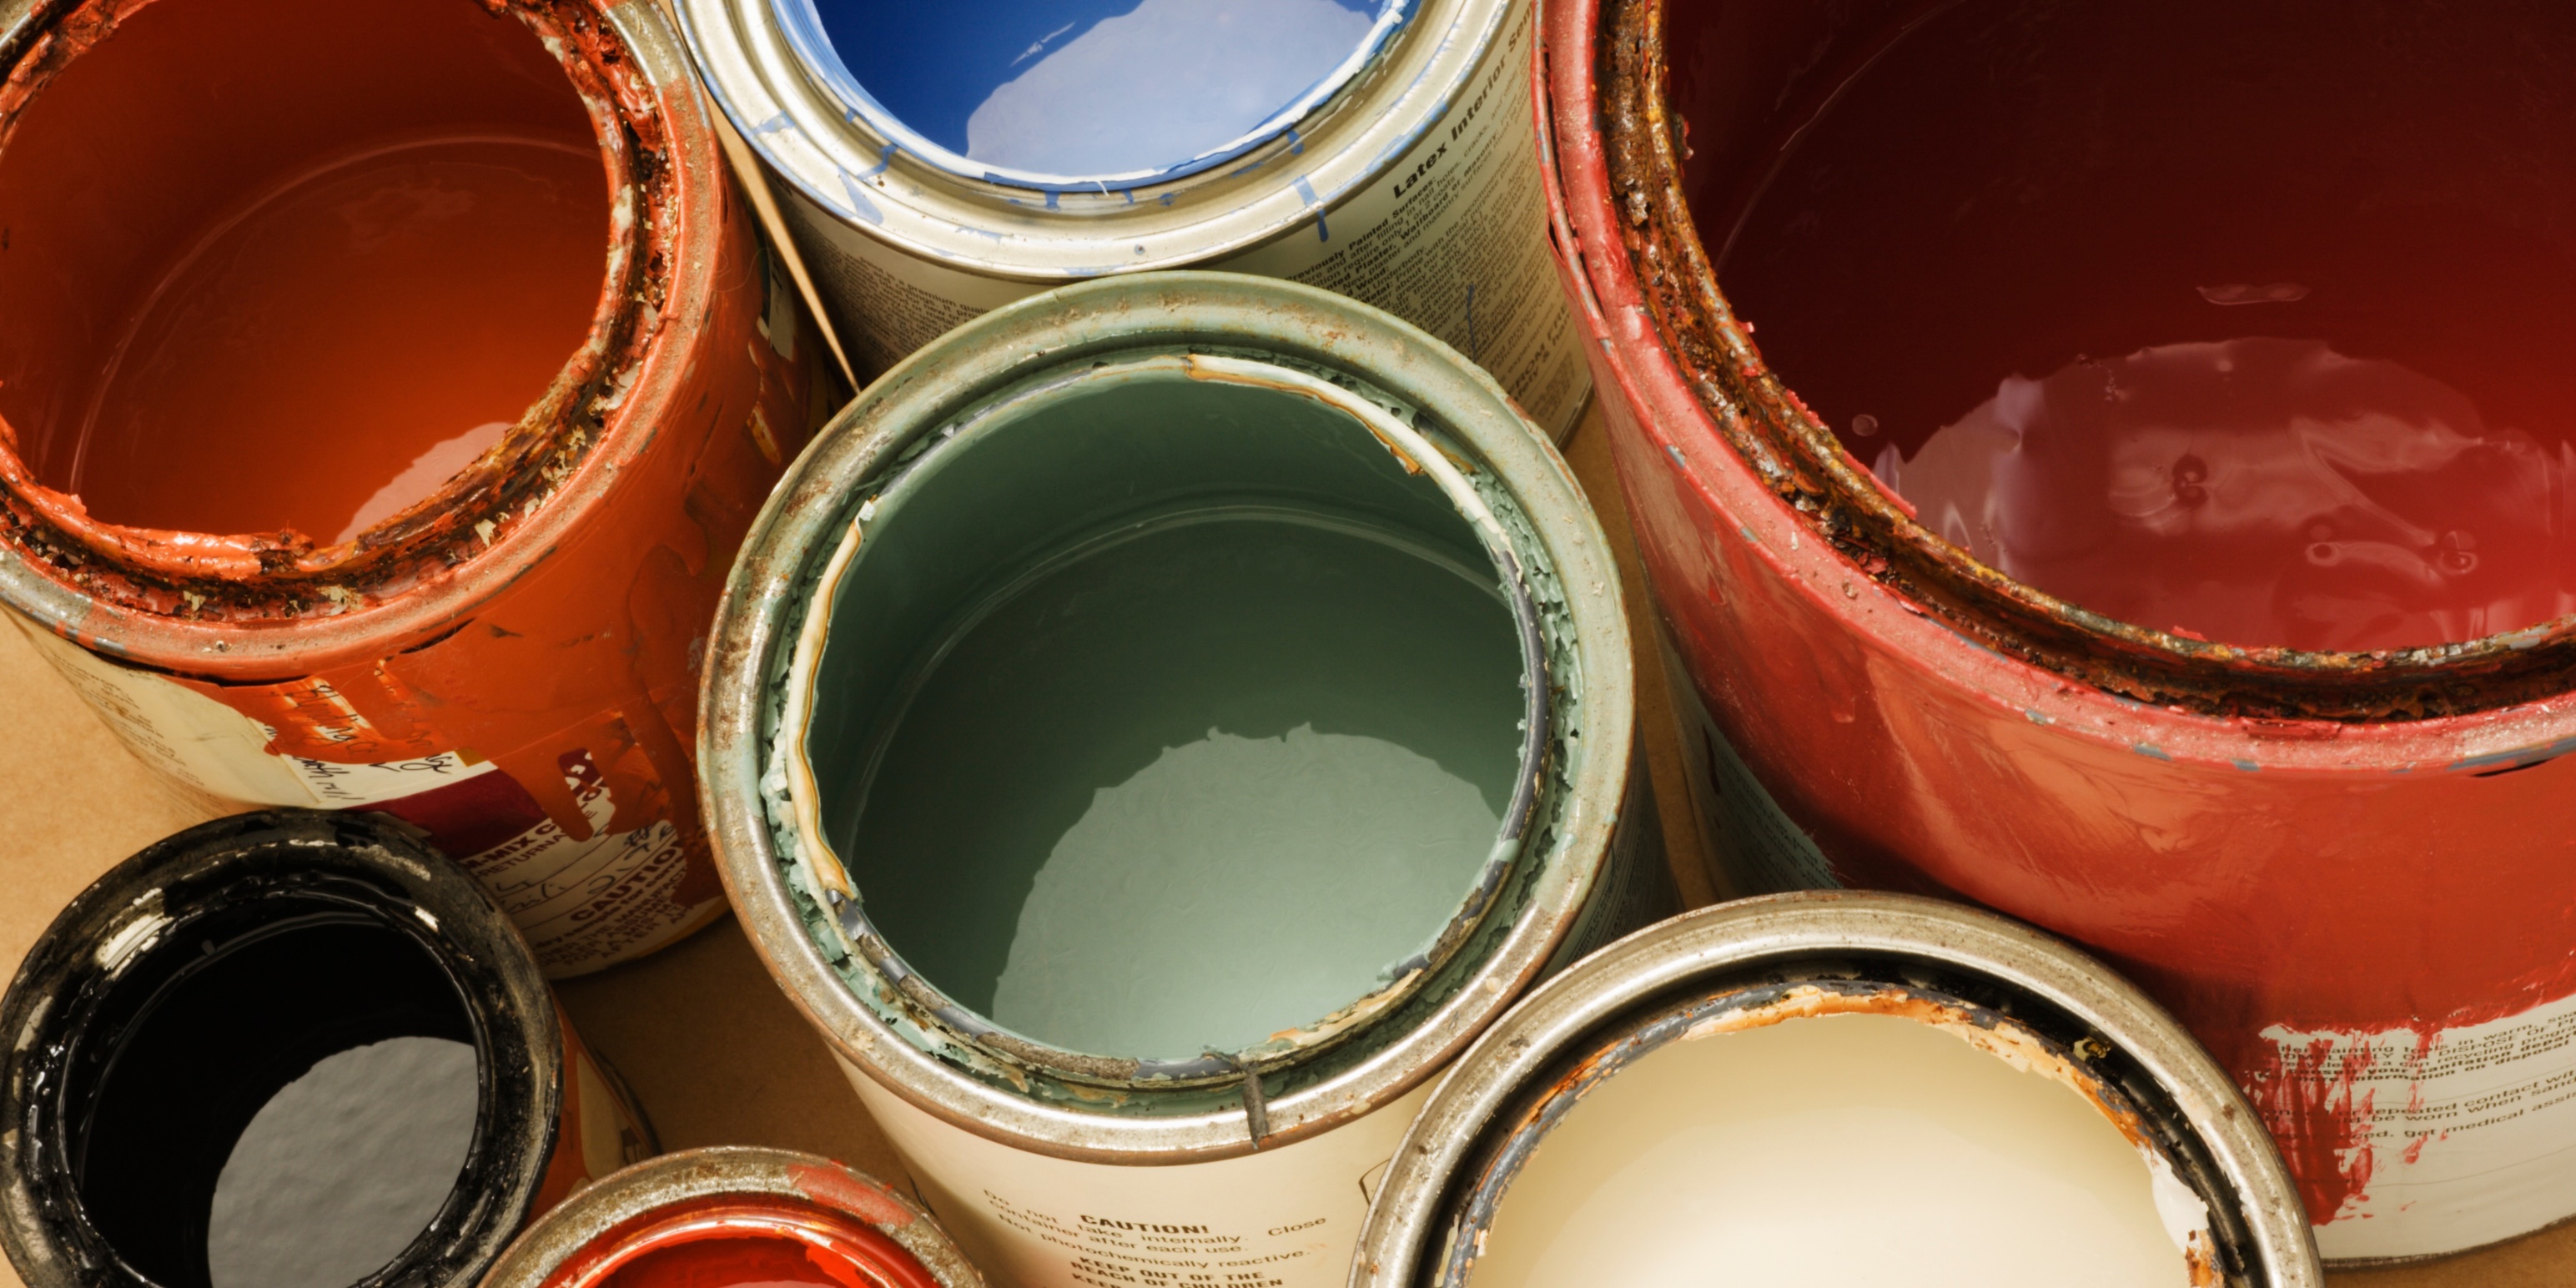 Cans of conventional paints containing harmful chemicals